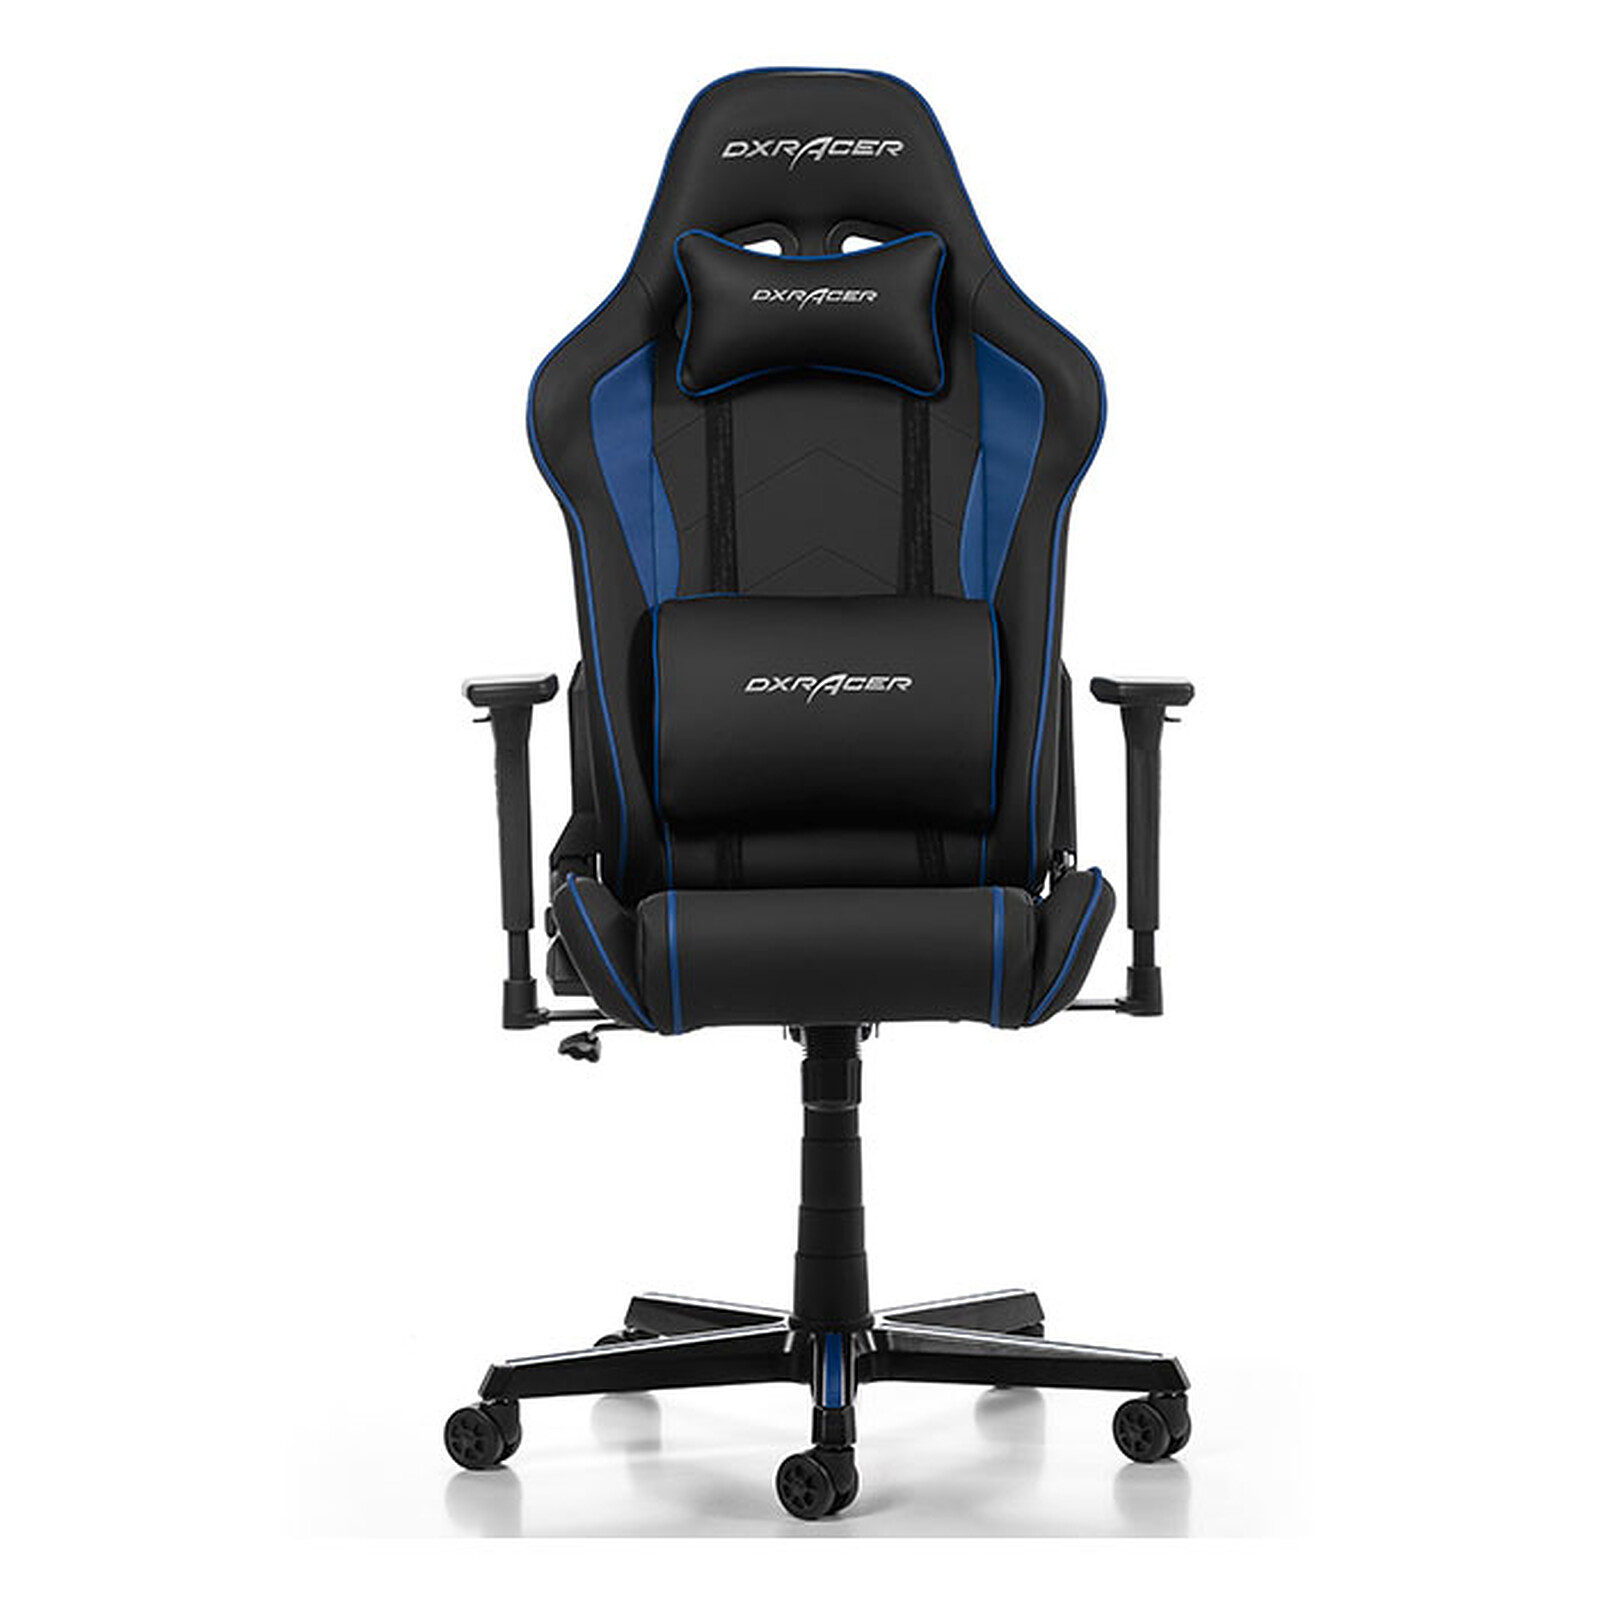 DXRacer Prince P08 (blue) - Gaming chair - LDLC 3-year warranty | Holy ...